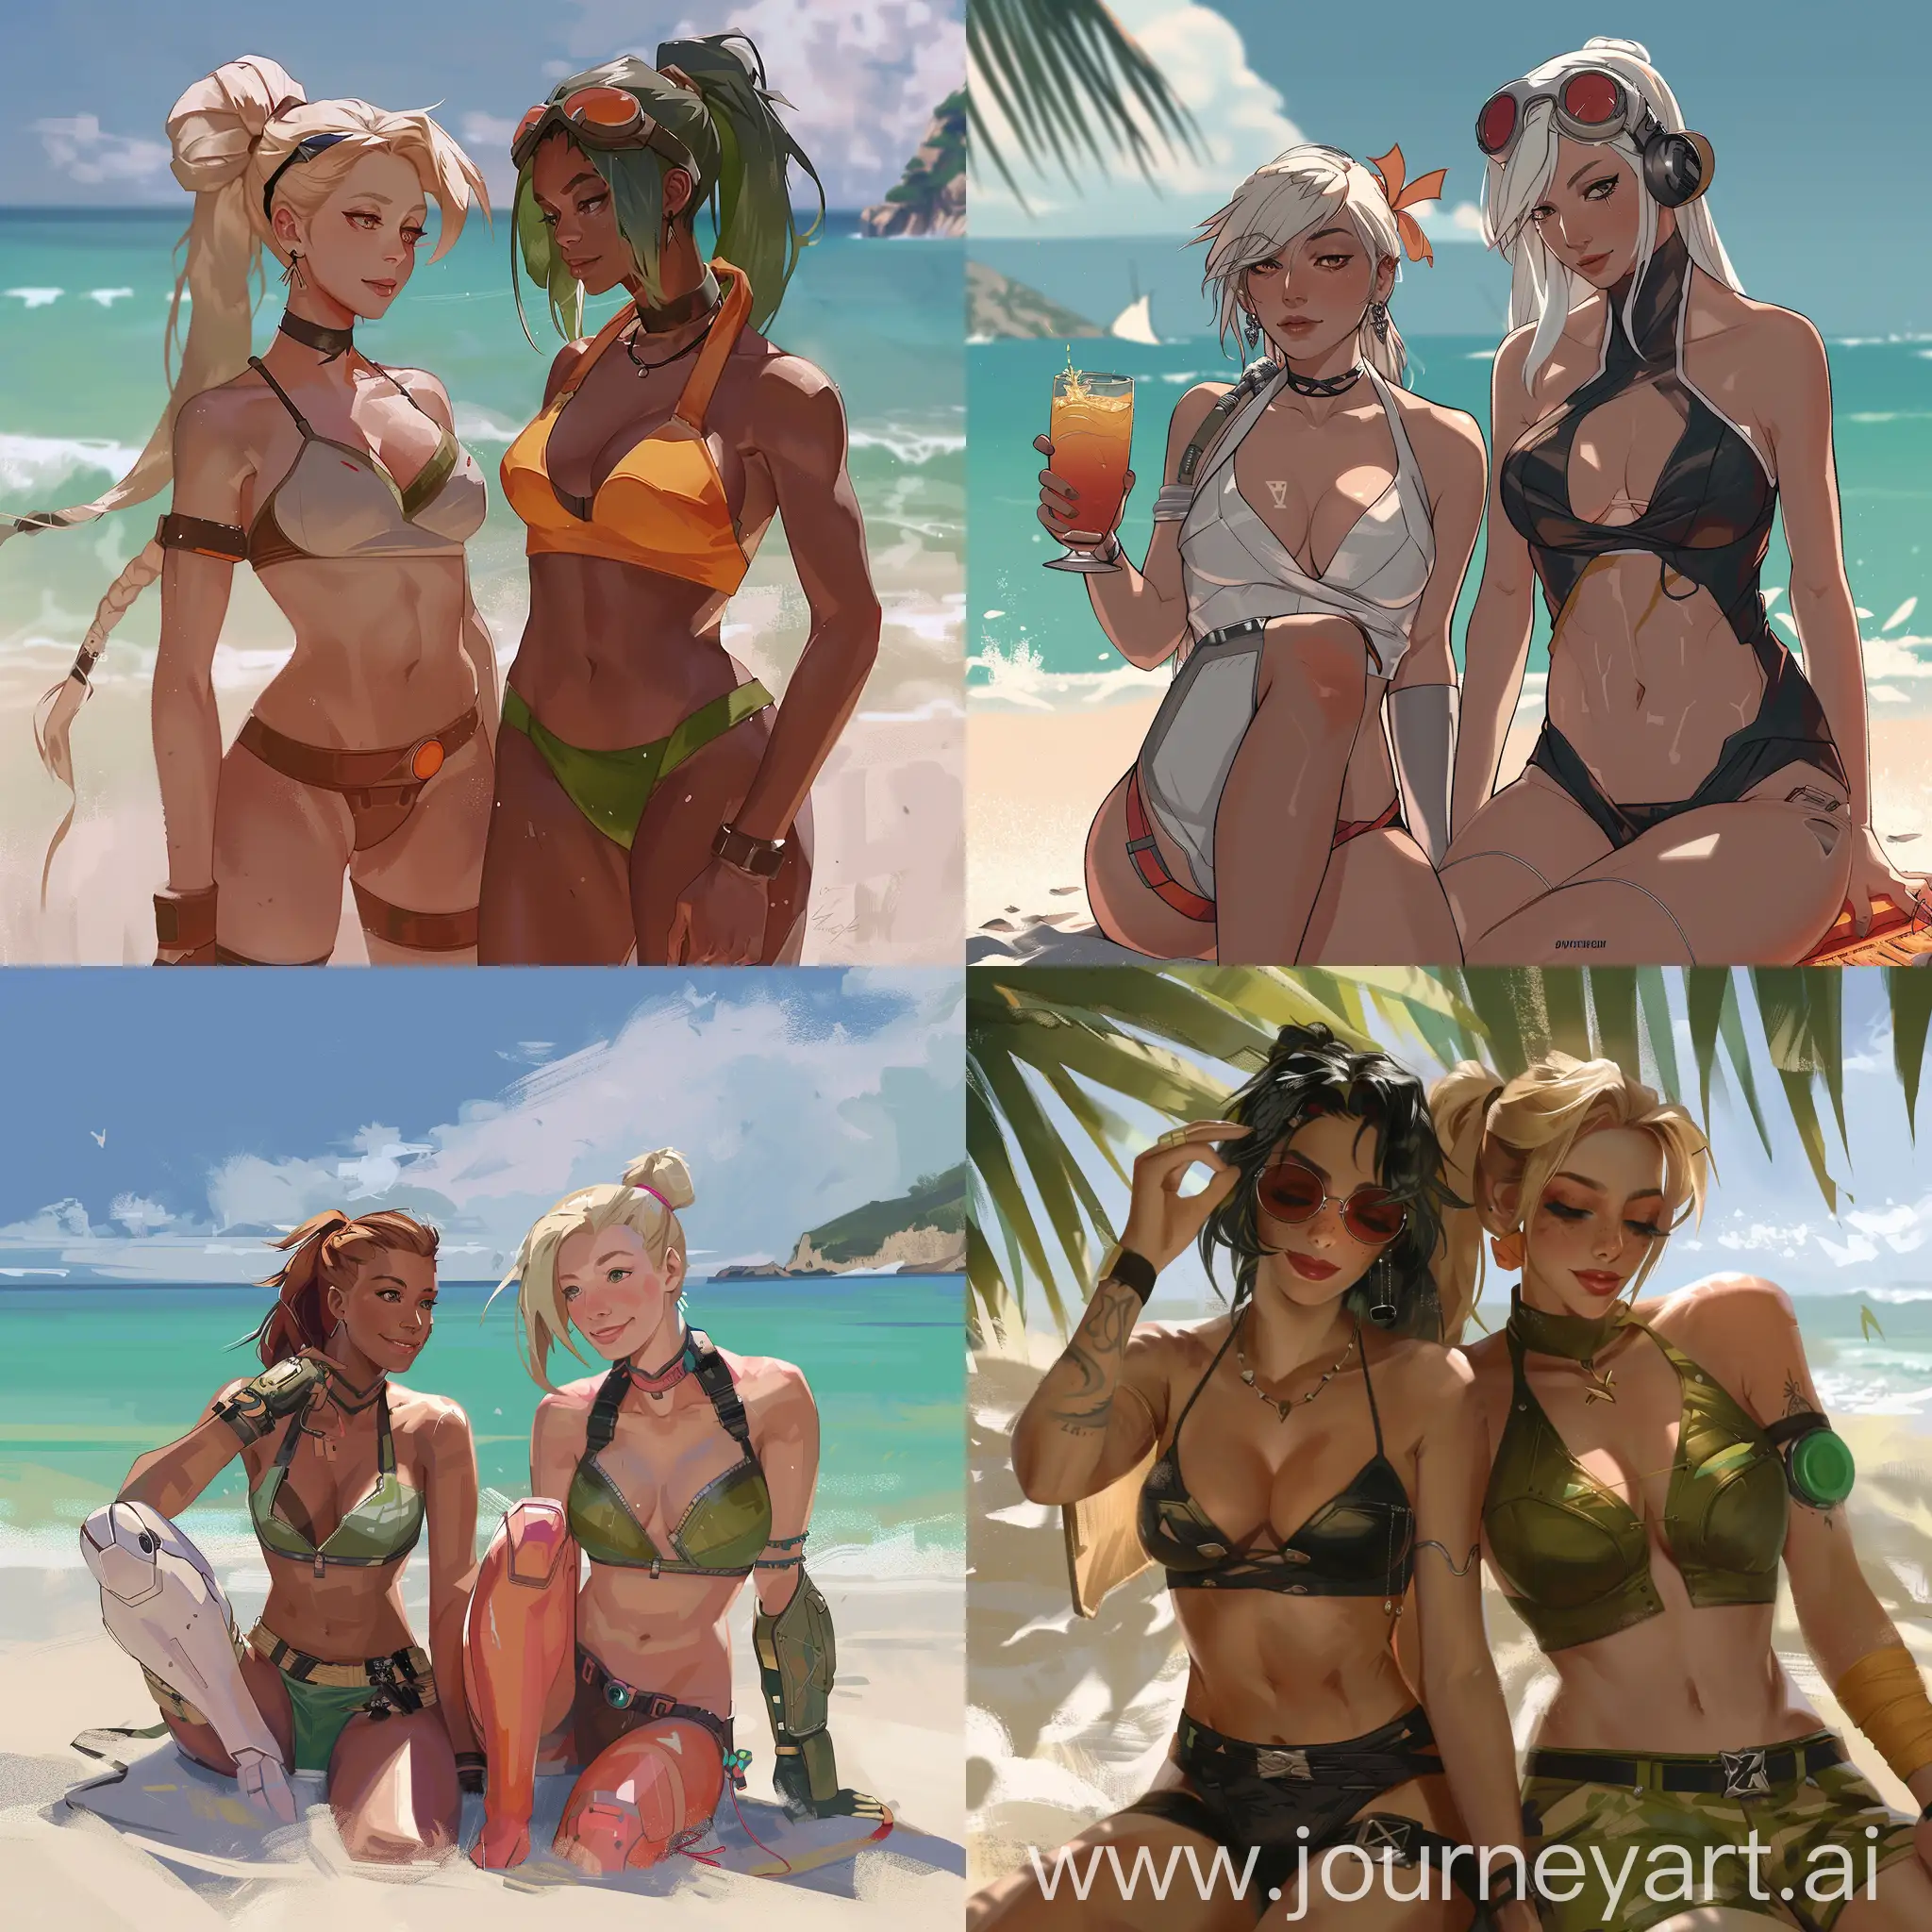 sage from valorant and mercy from overwatch chlling on the beach